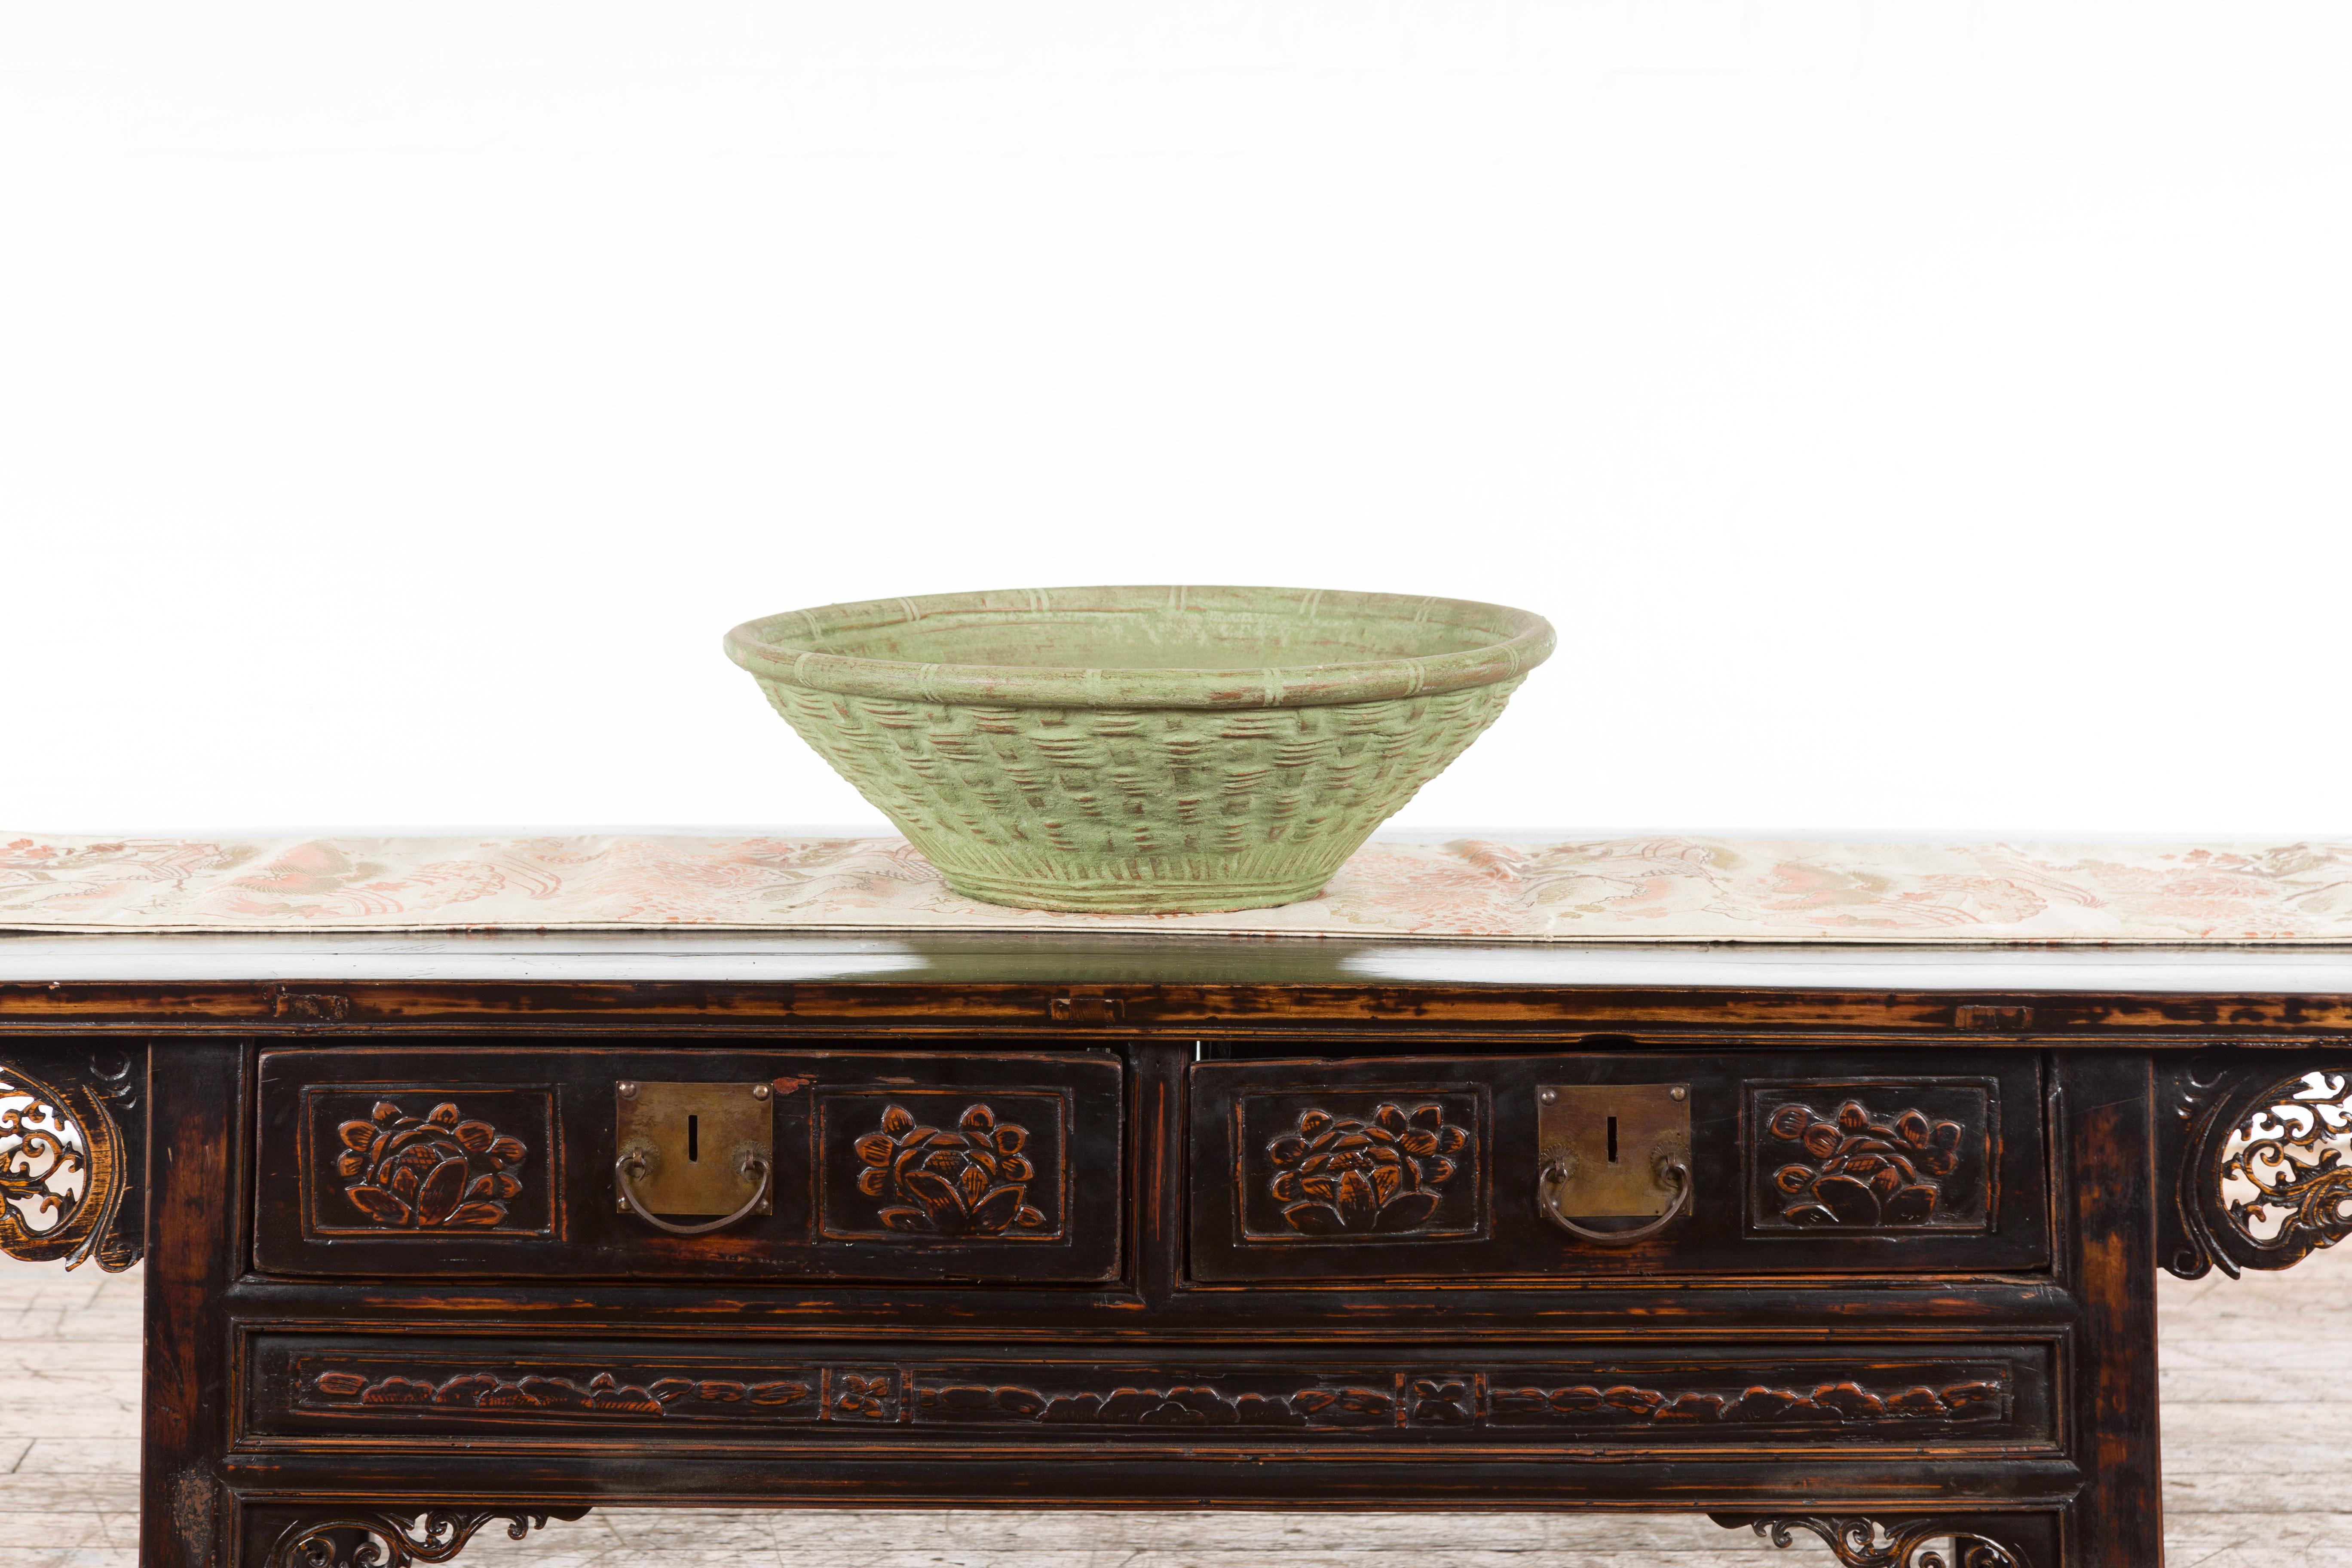 Vintage Thai Terracotta Wicker Style Circular Tapering Bowl with Green Patina In Good Condition For Sale In Yonkers, NY